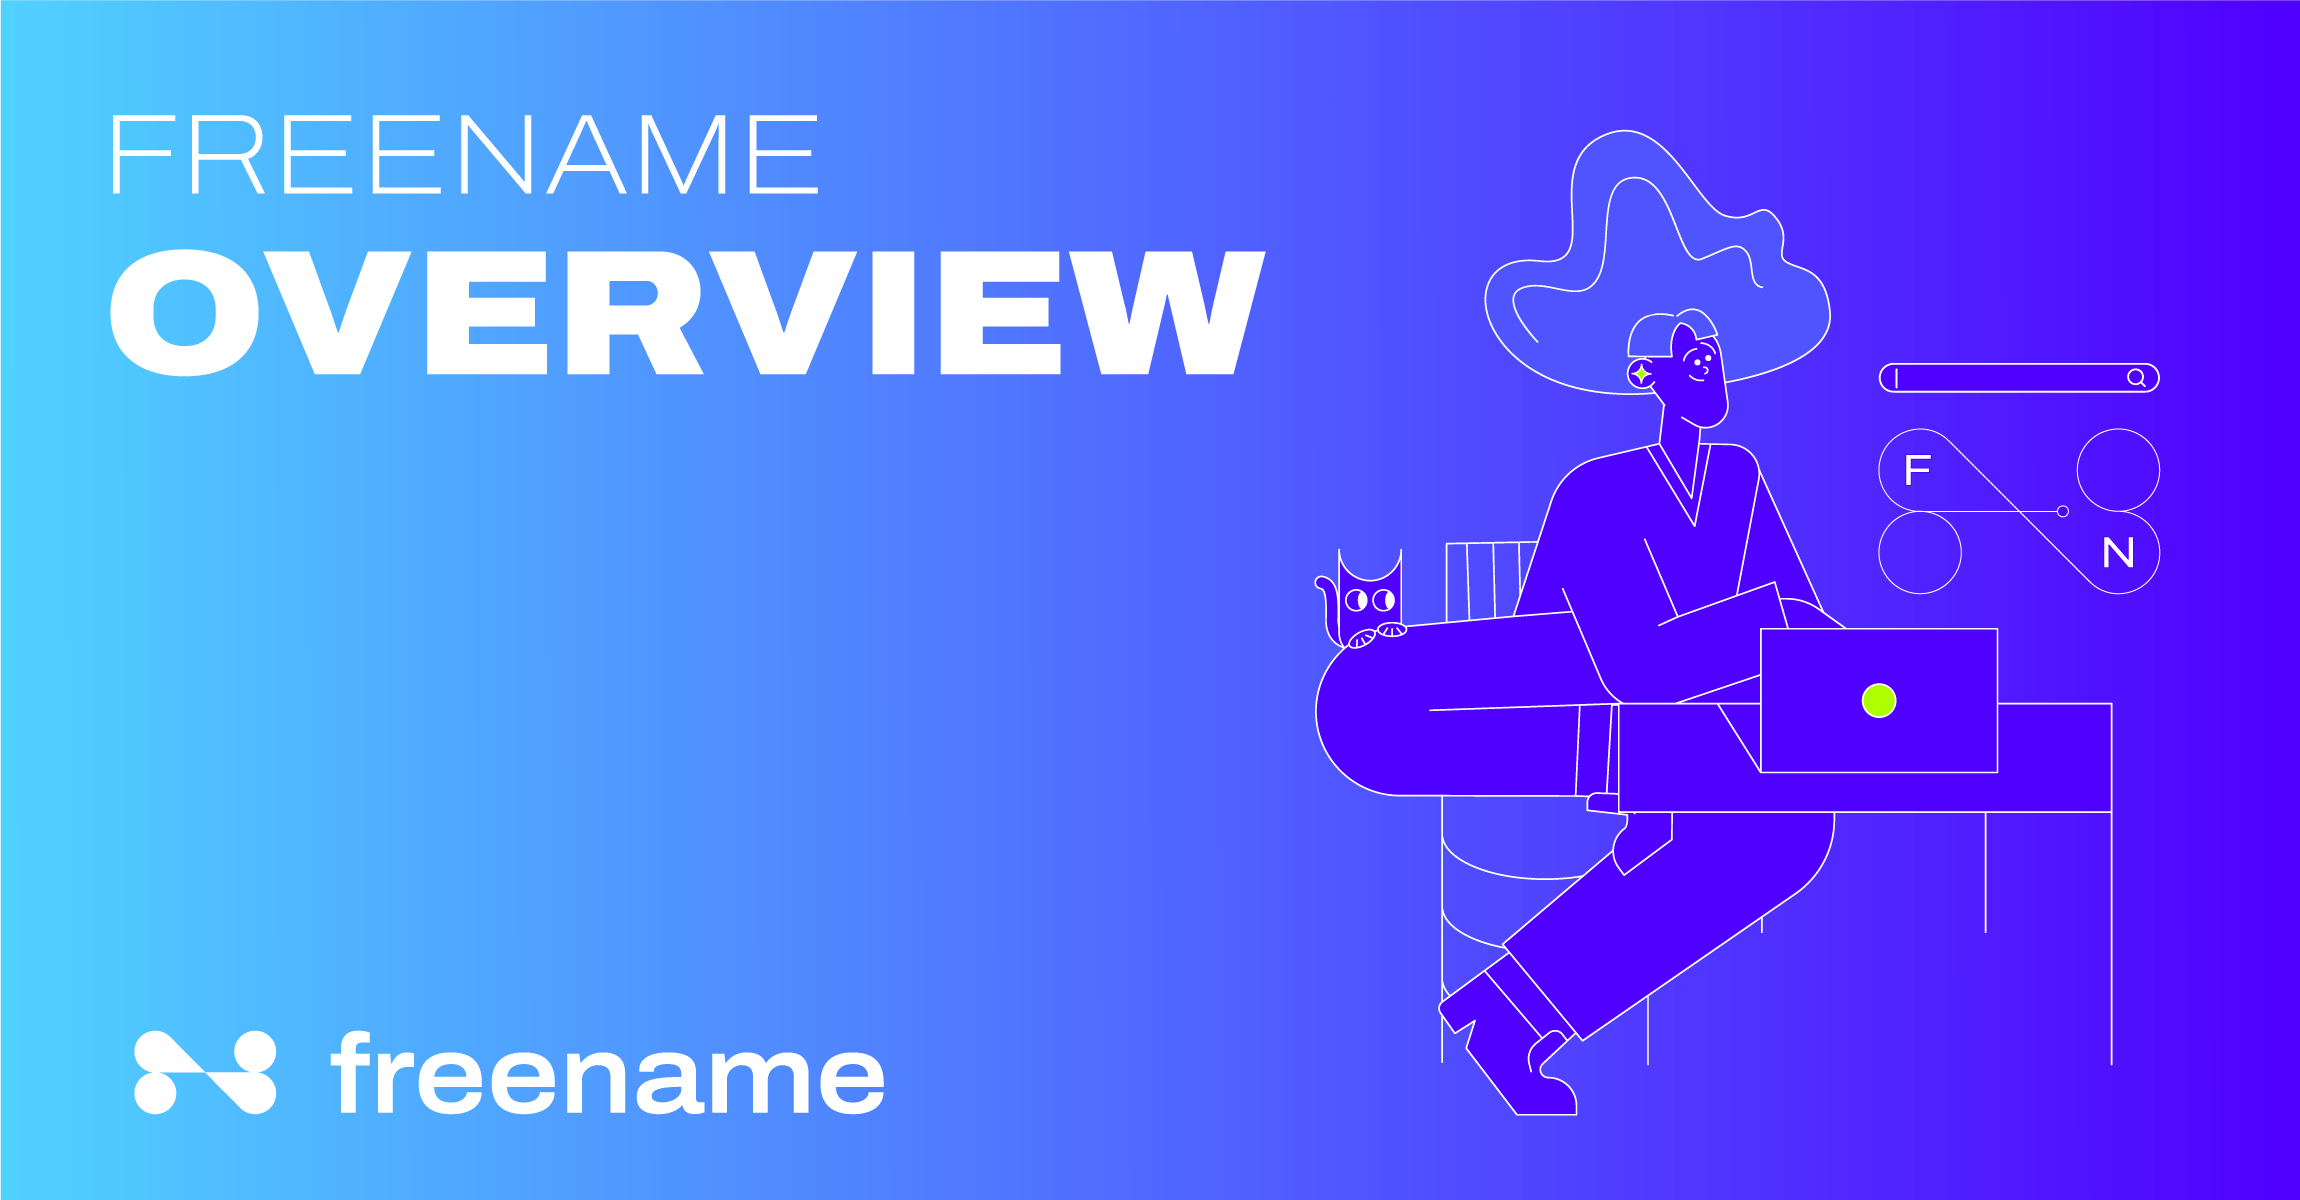 Freename Overview blog